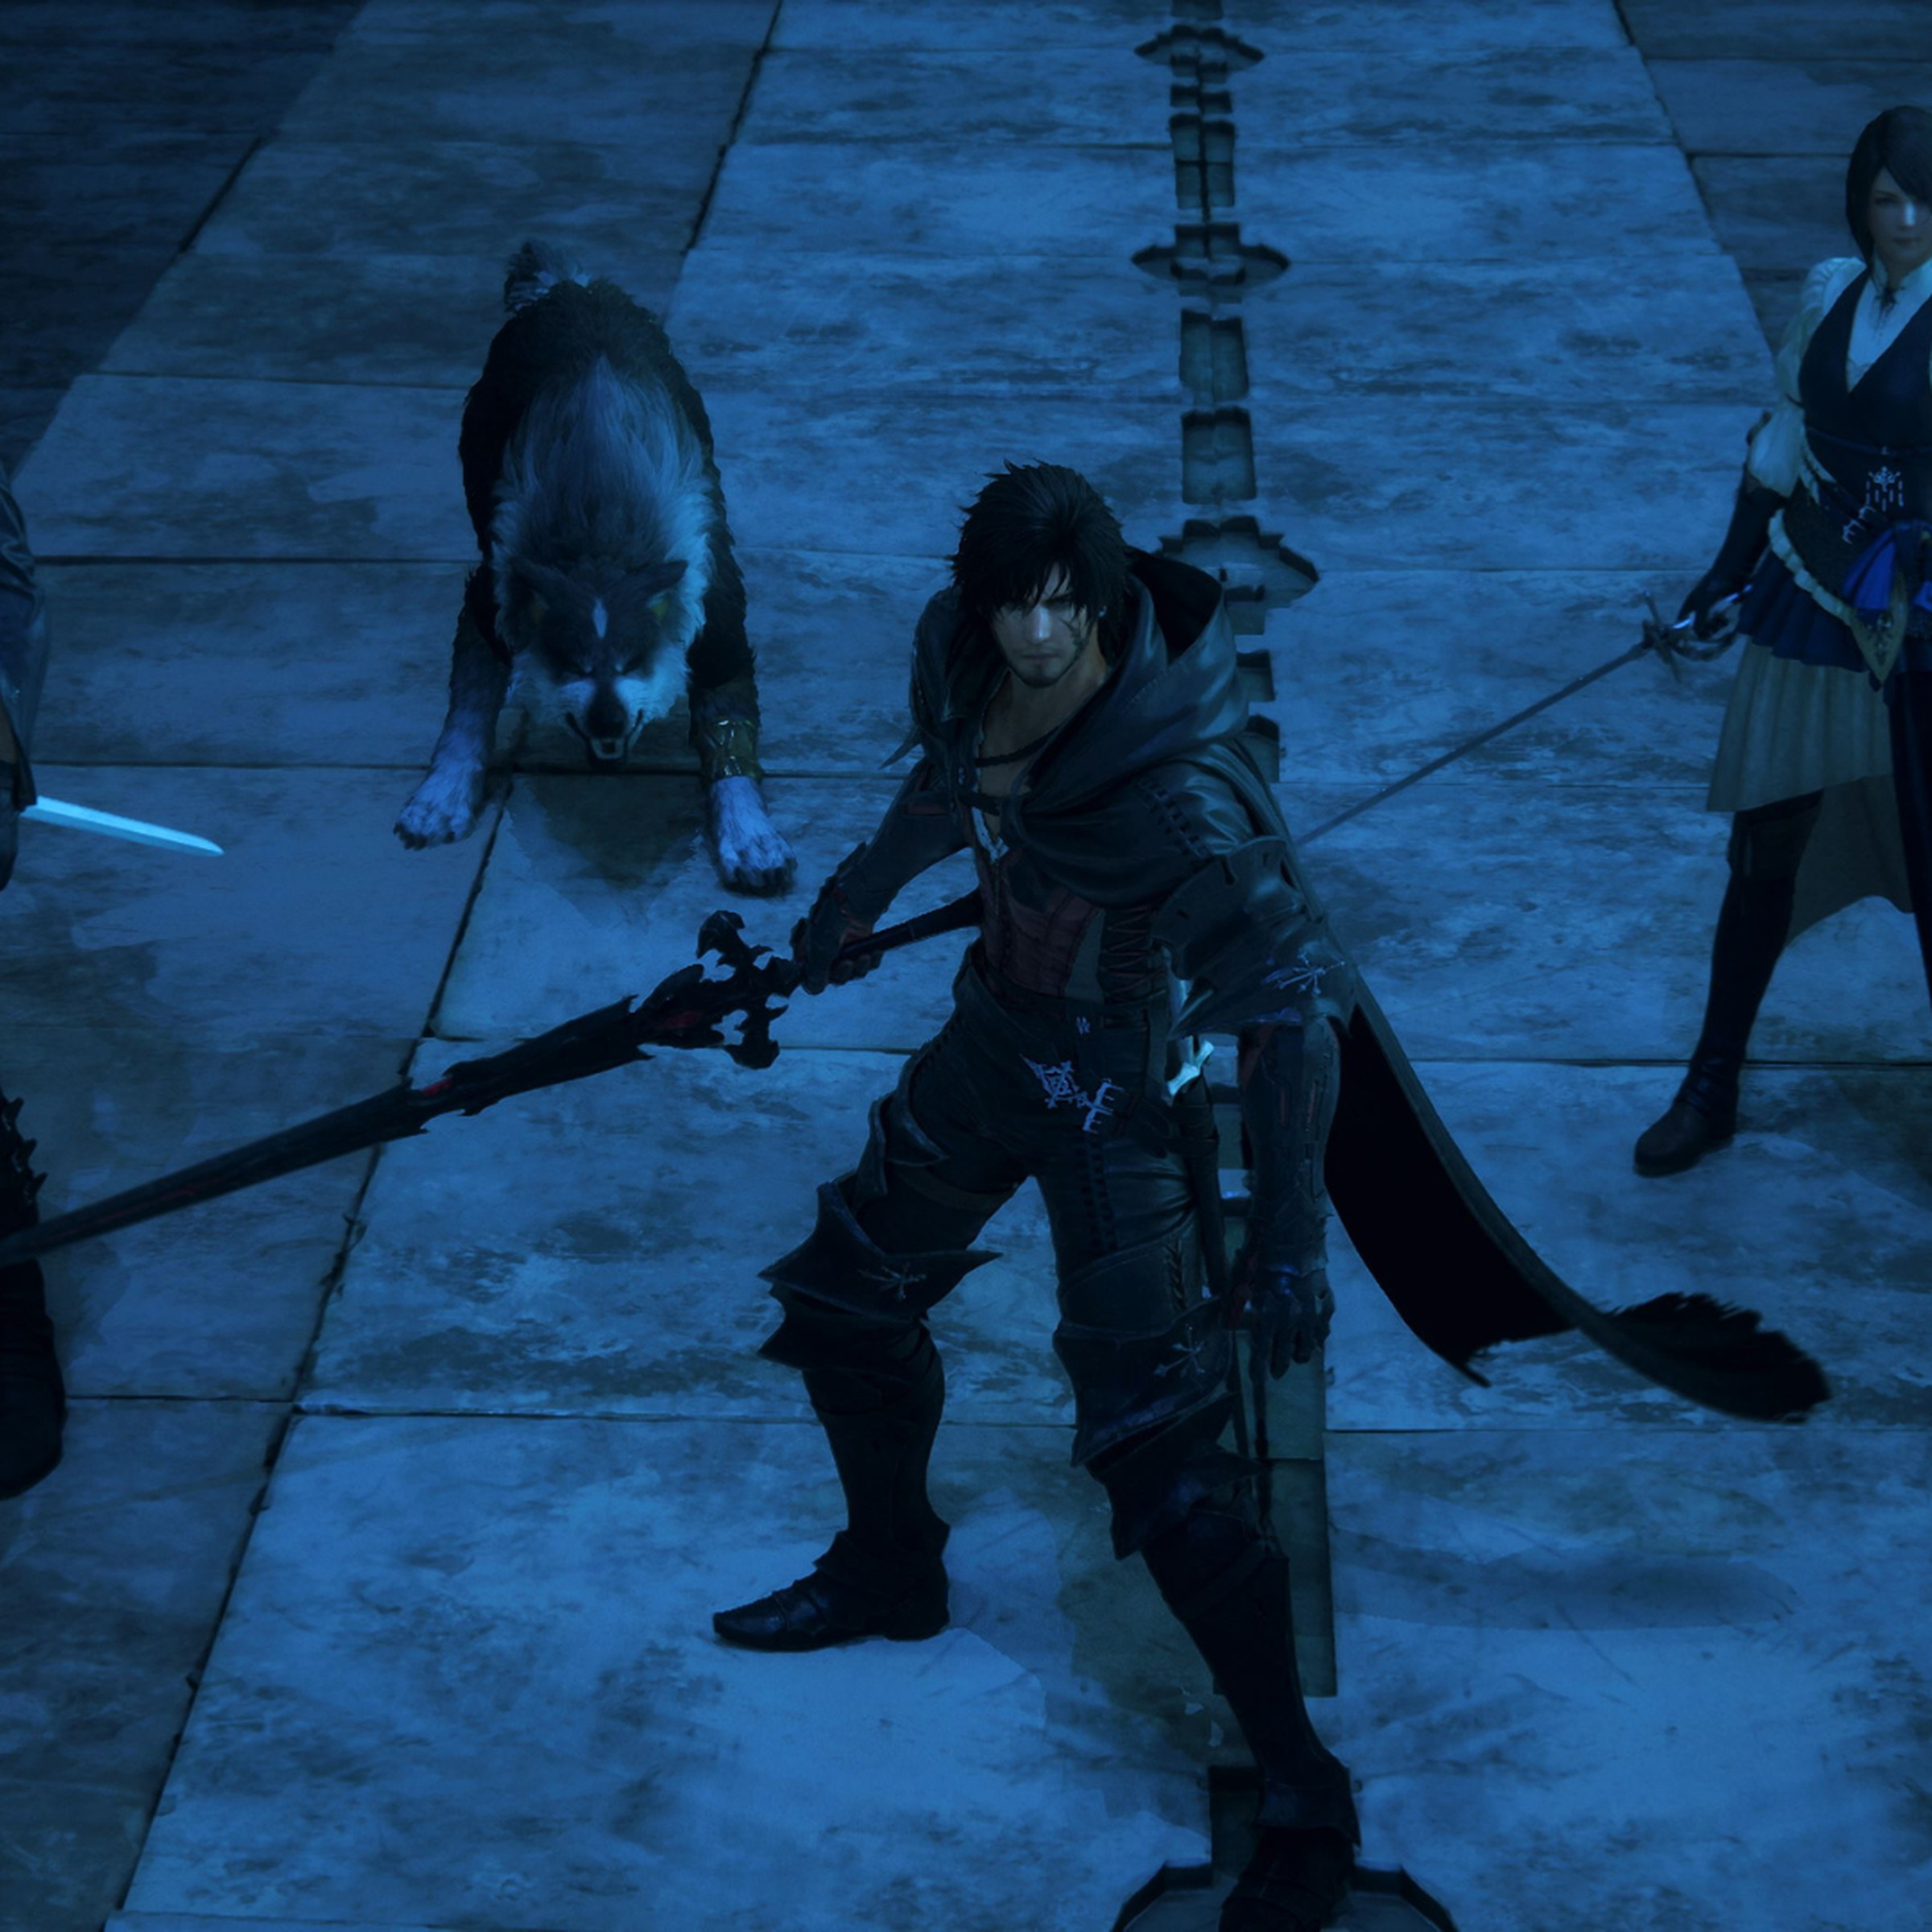 Screenshot from Final Fantasy XVI featuring Cid, Torgal the wolf, Clive, and Jill